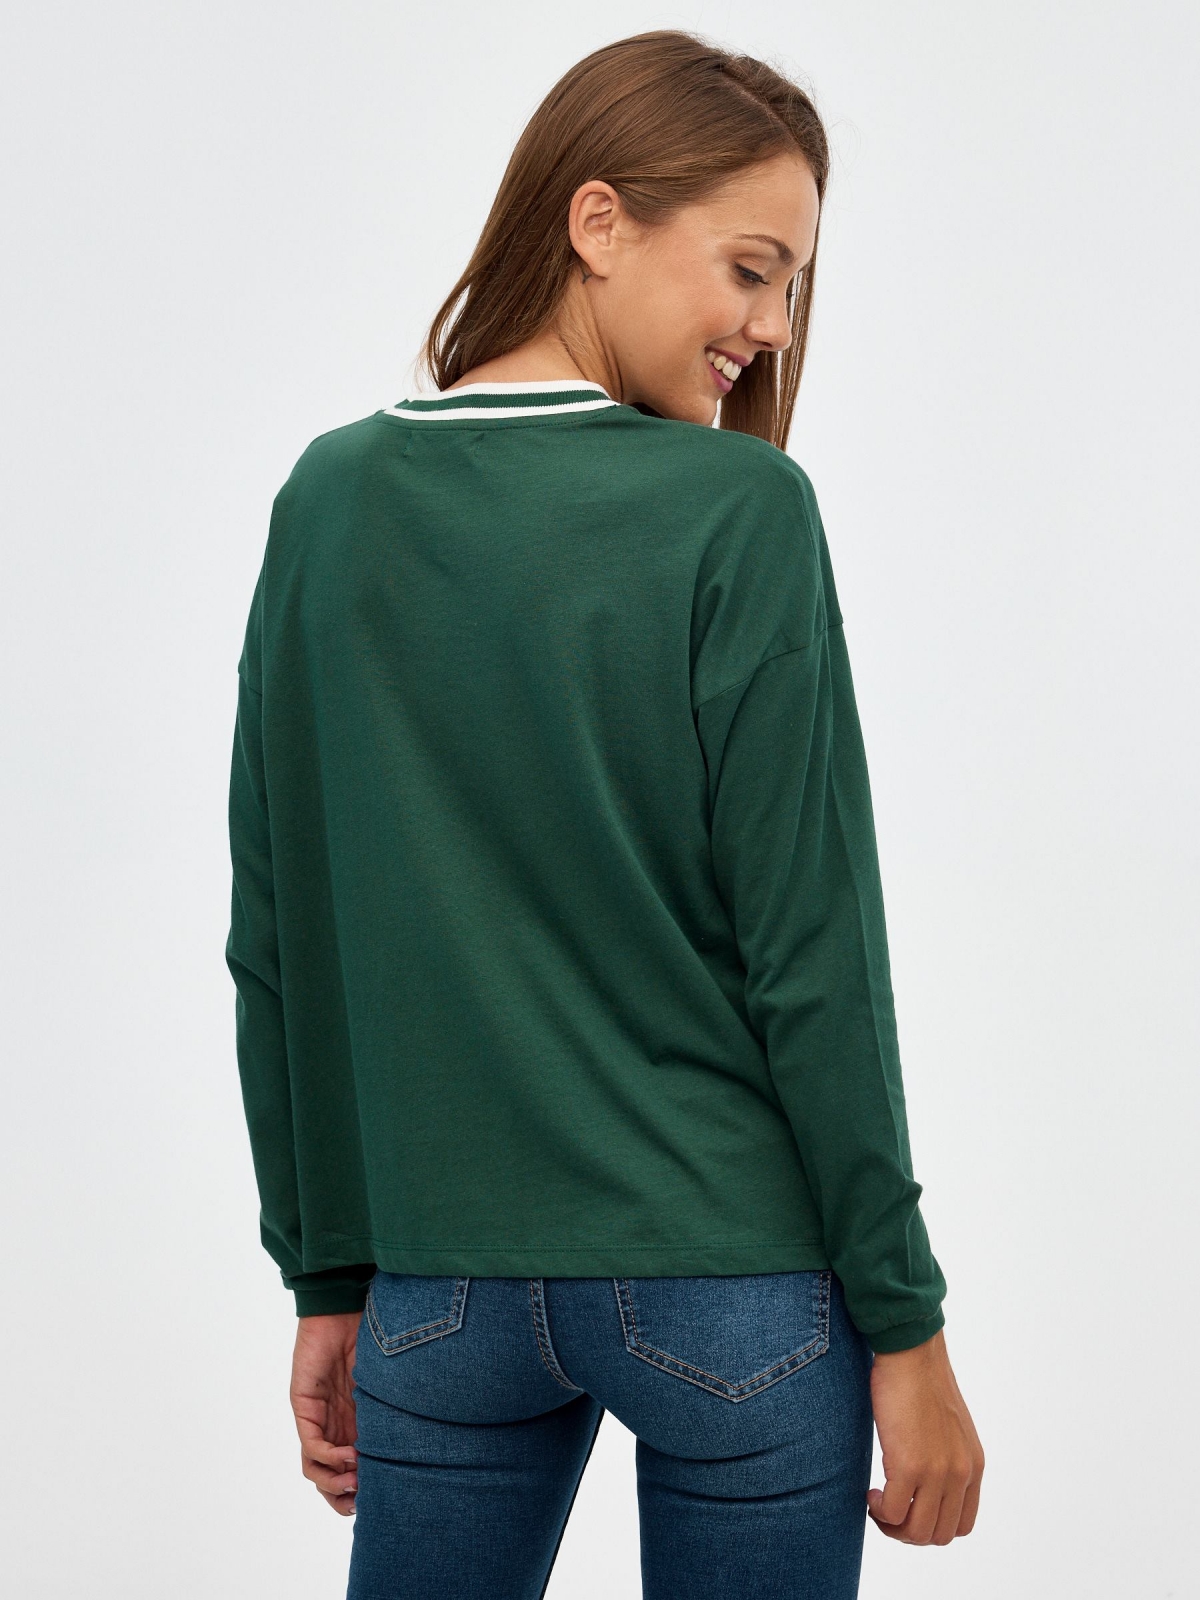 Portland oversized T-shirt dark green middle back view